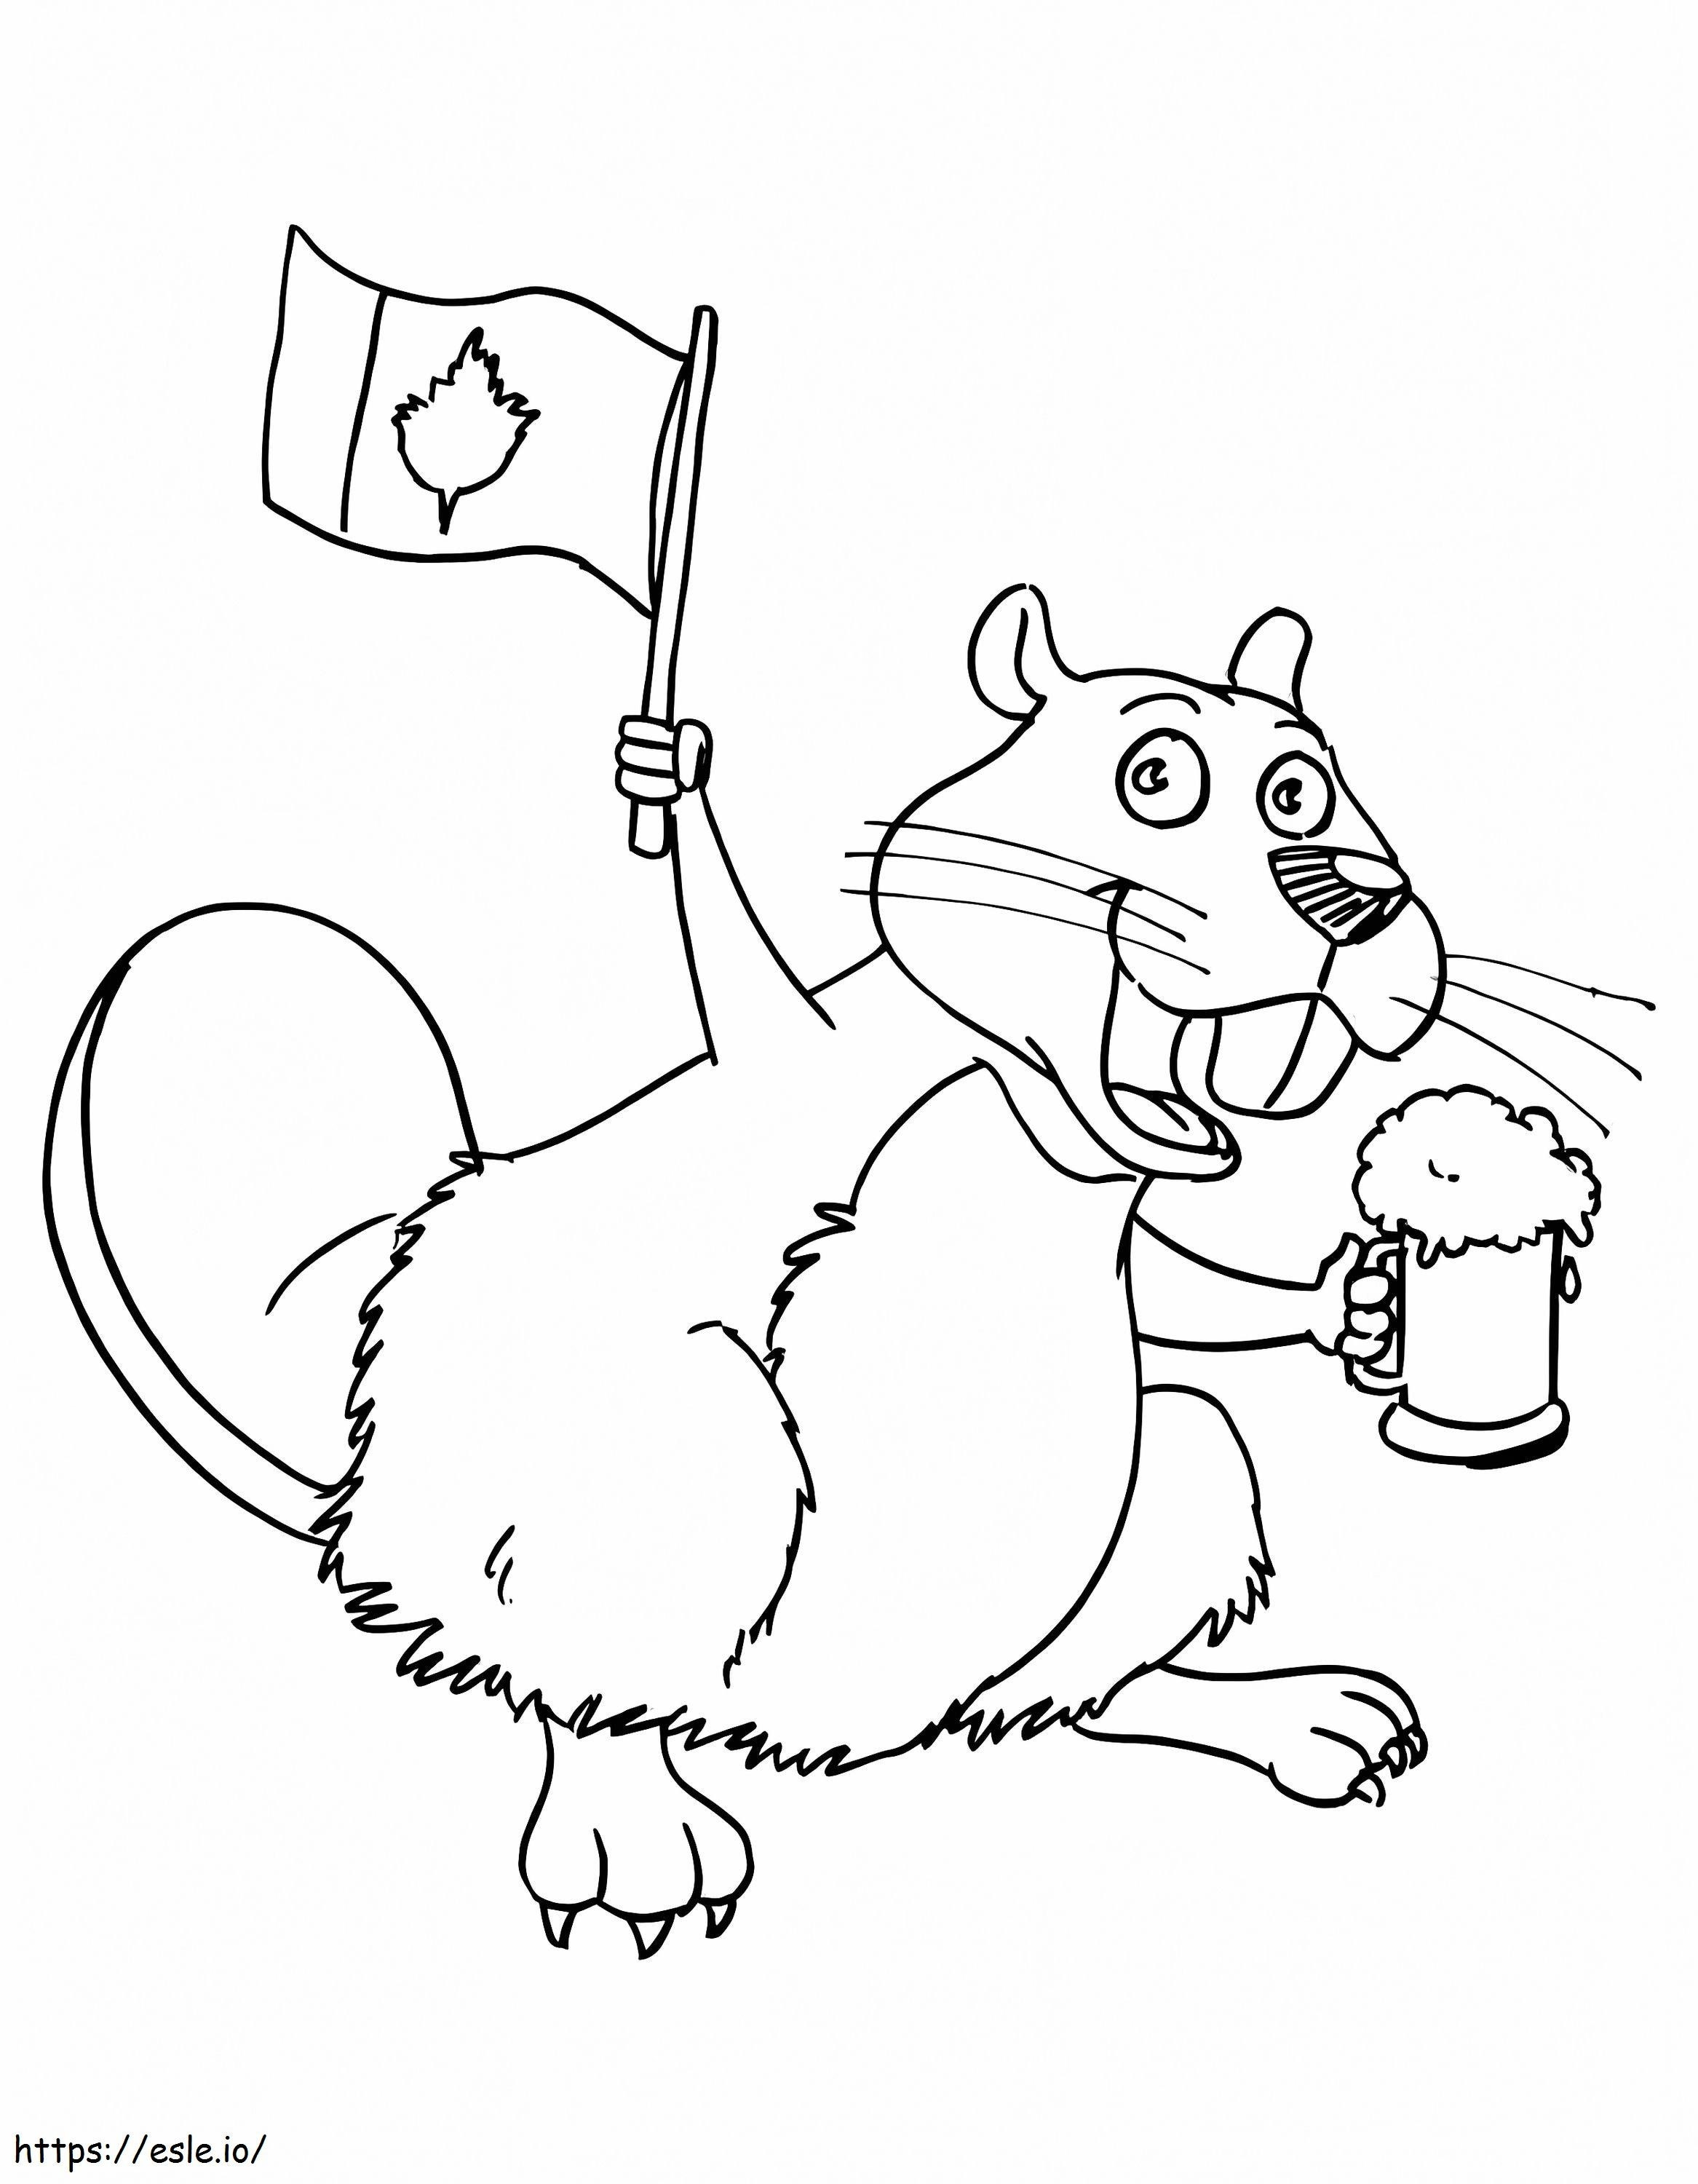 Canadian Beaver coloring page